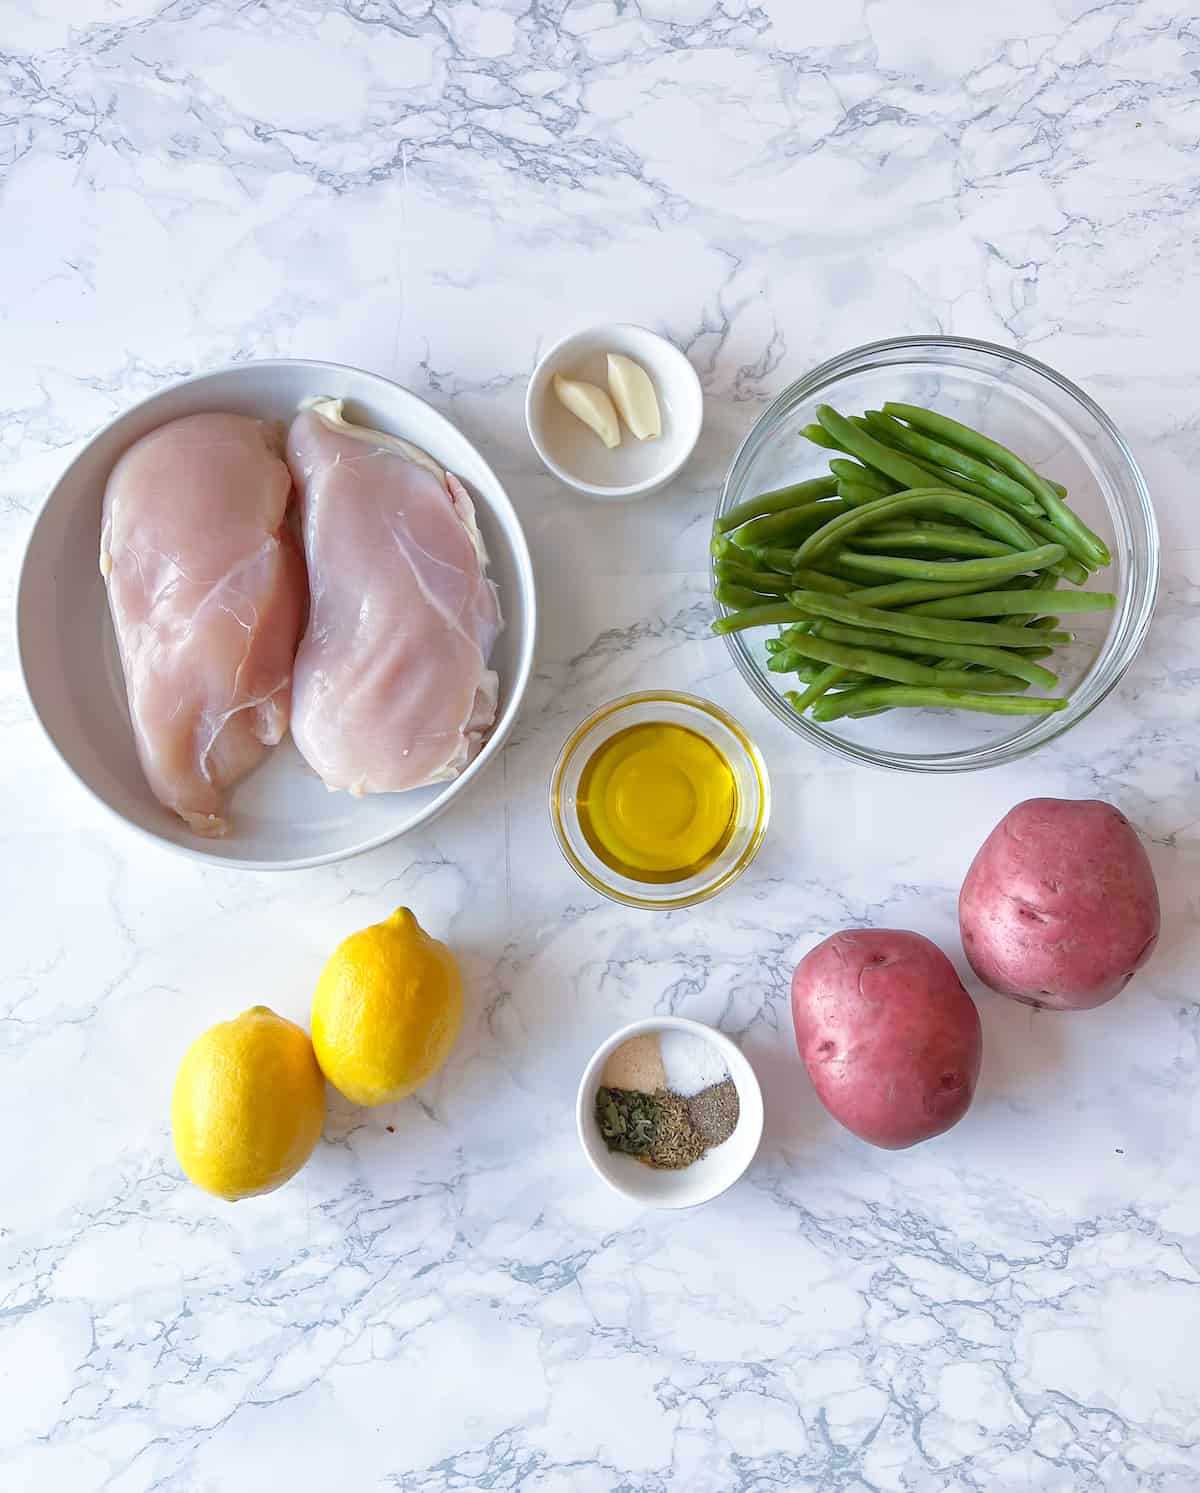 Ingredients for Slow Cooker Chicken, Green Beans and Potatoes on a marble table. There are large boneless skinless chicken breasts, fresh green beans, red potatoes, lemons, olive oil, and spices